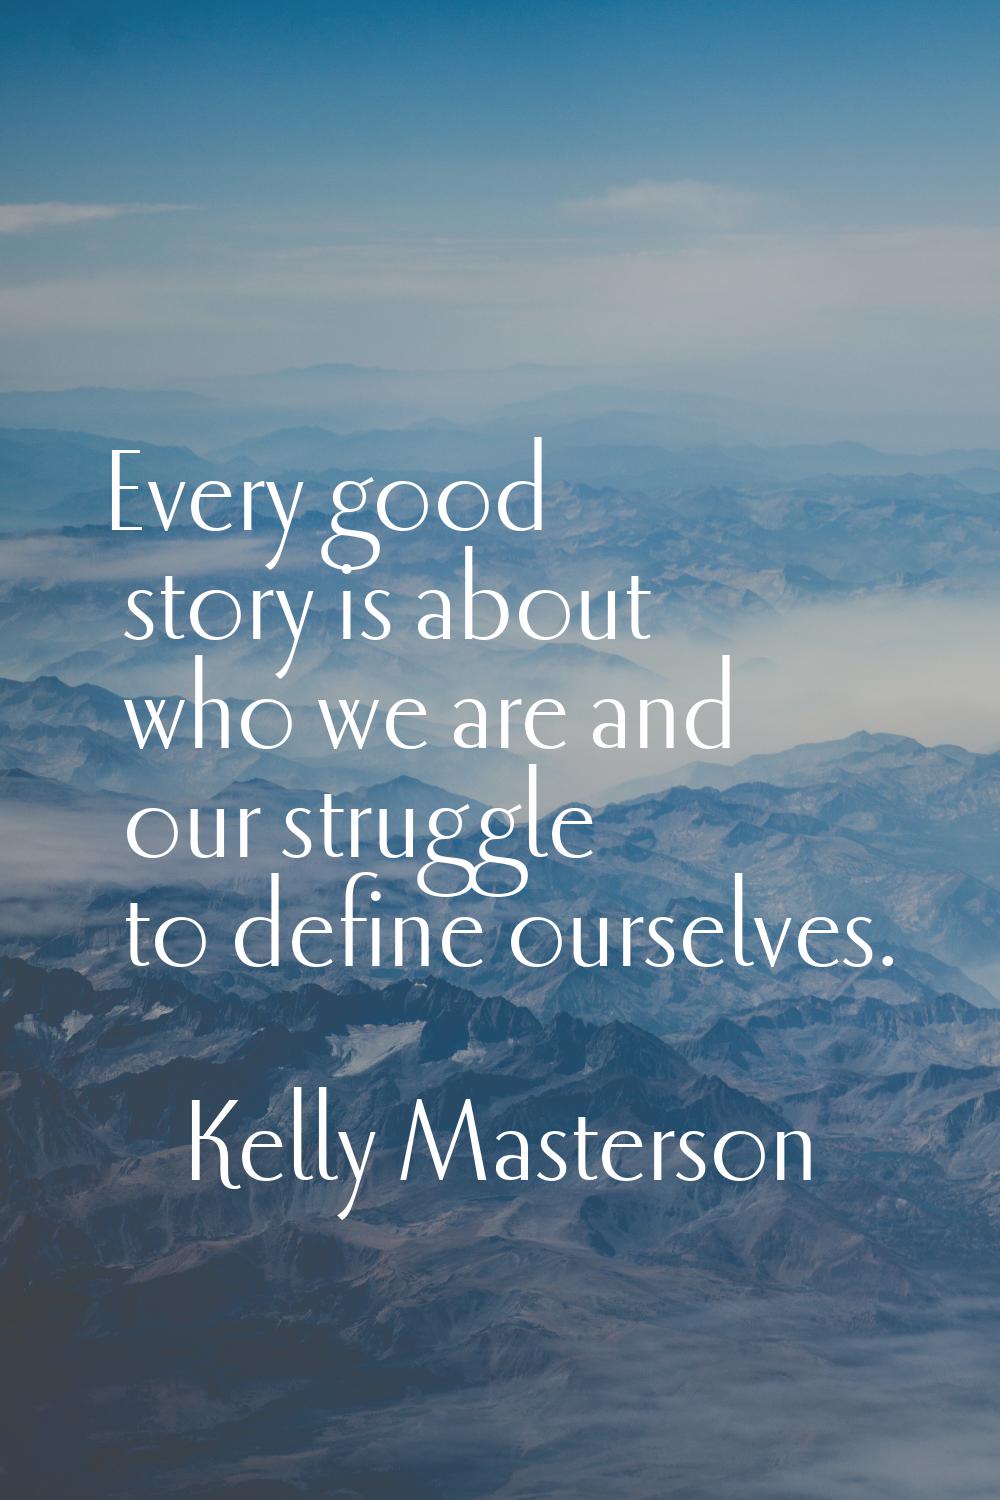 Every good story is about who we are and our struggle to define ourselves.